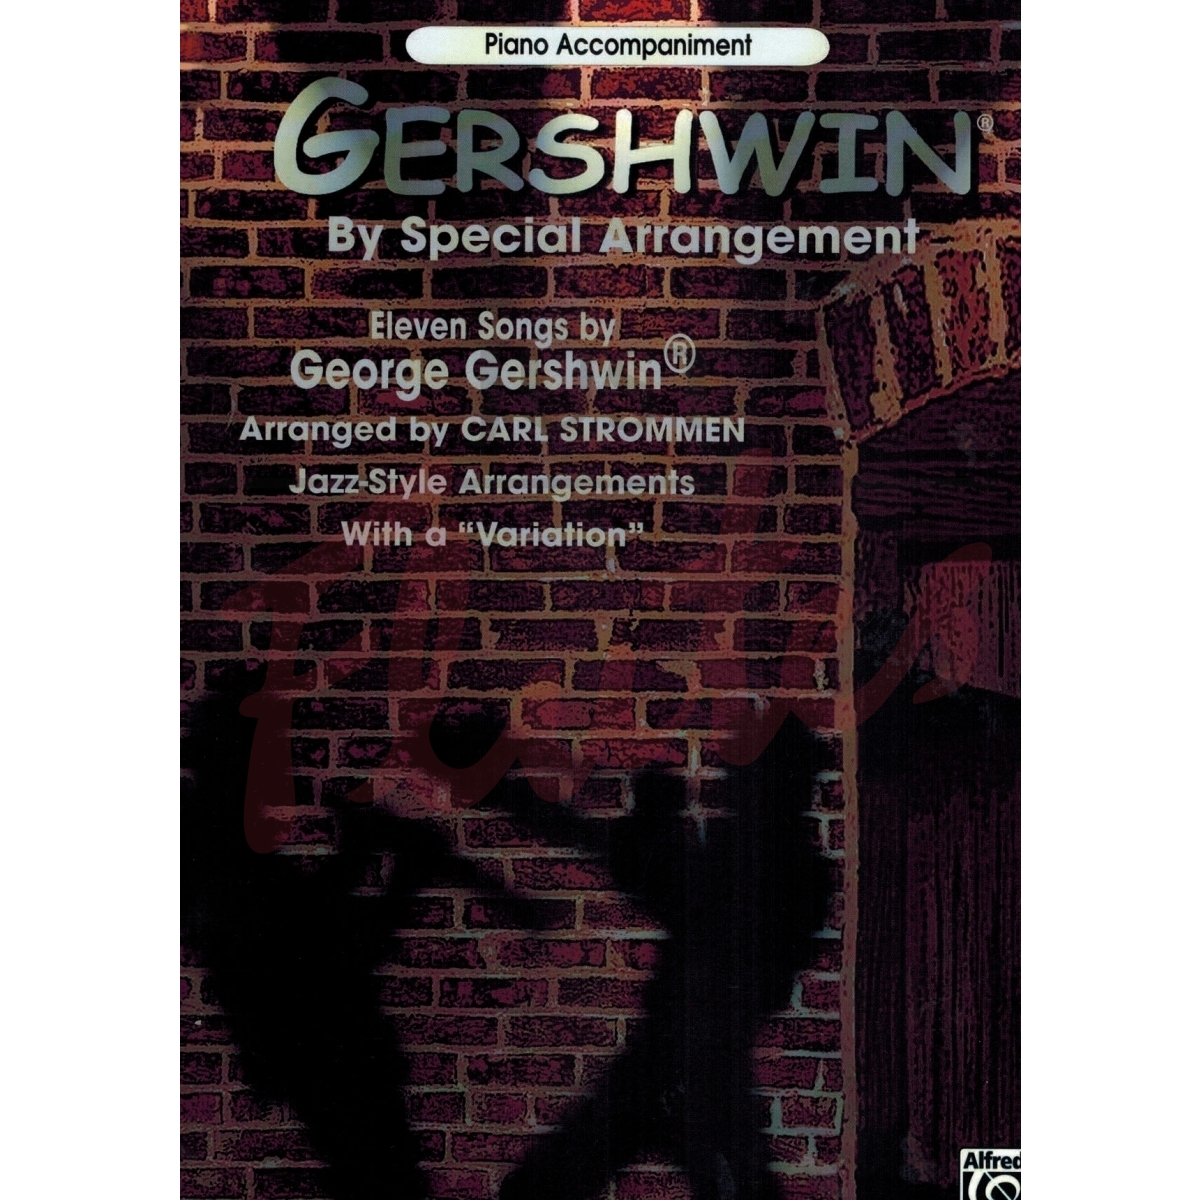 Gershwin by Special Arrangement [Piano Accompaniment Book]